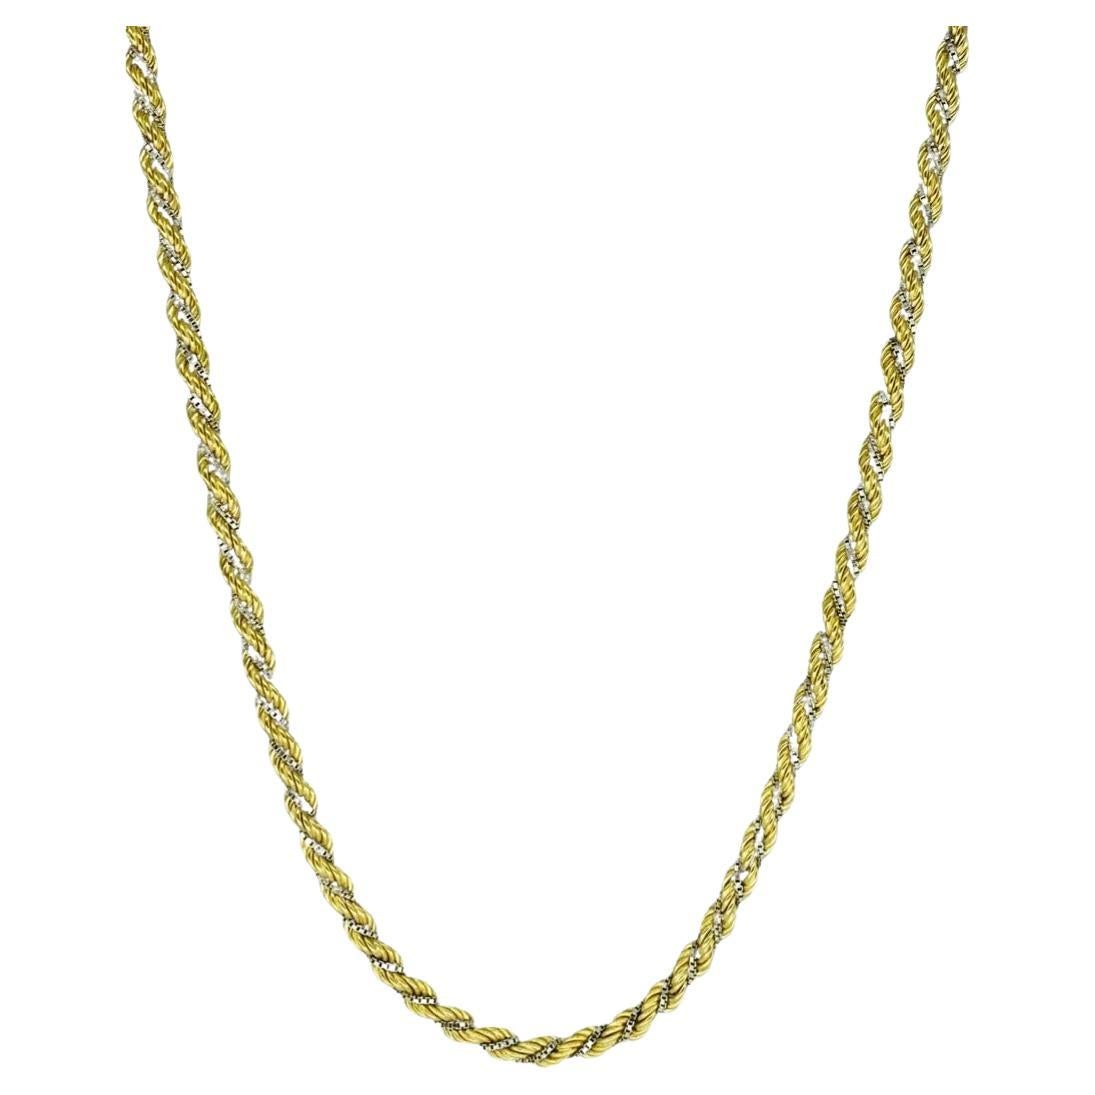 Antique Twisted Two Chain Link 18k Two-Tone Rope and Box Chain Link For Sale